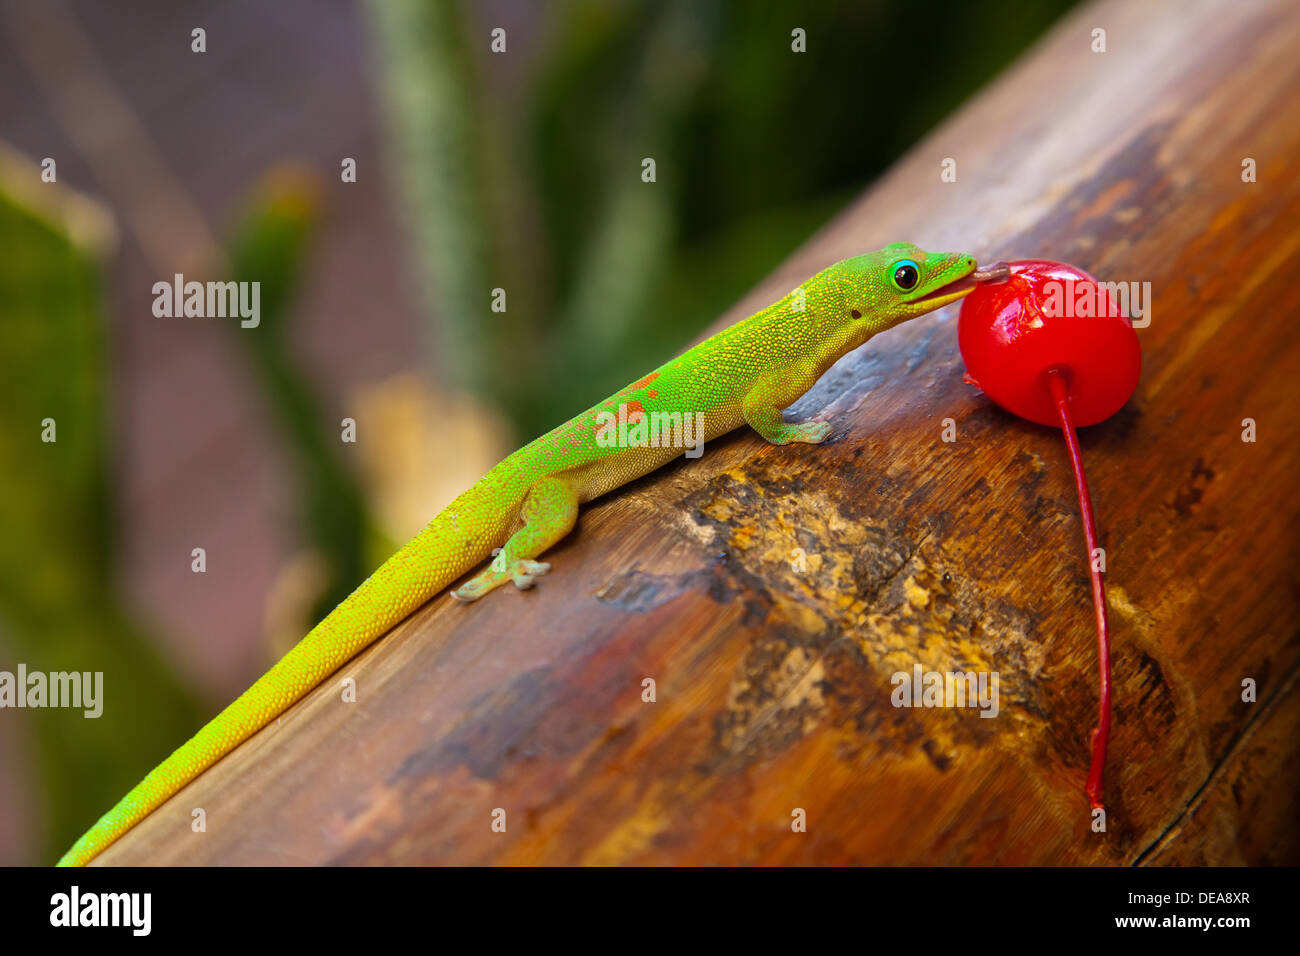 A bright gold dust day gecko (Phelsuma laticauda) feeds on a cherry while sitting on a piece of bamboo. Stock Photo